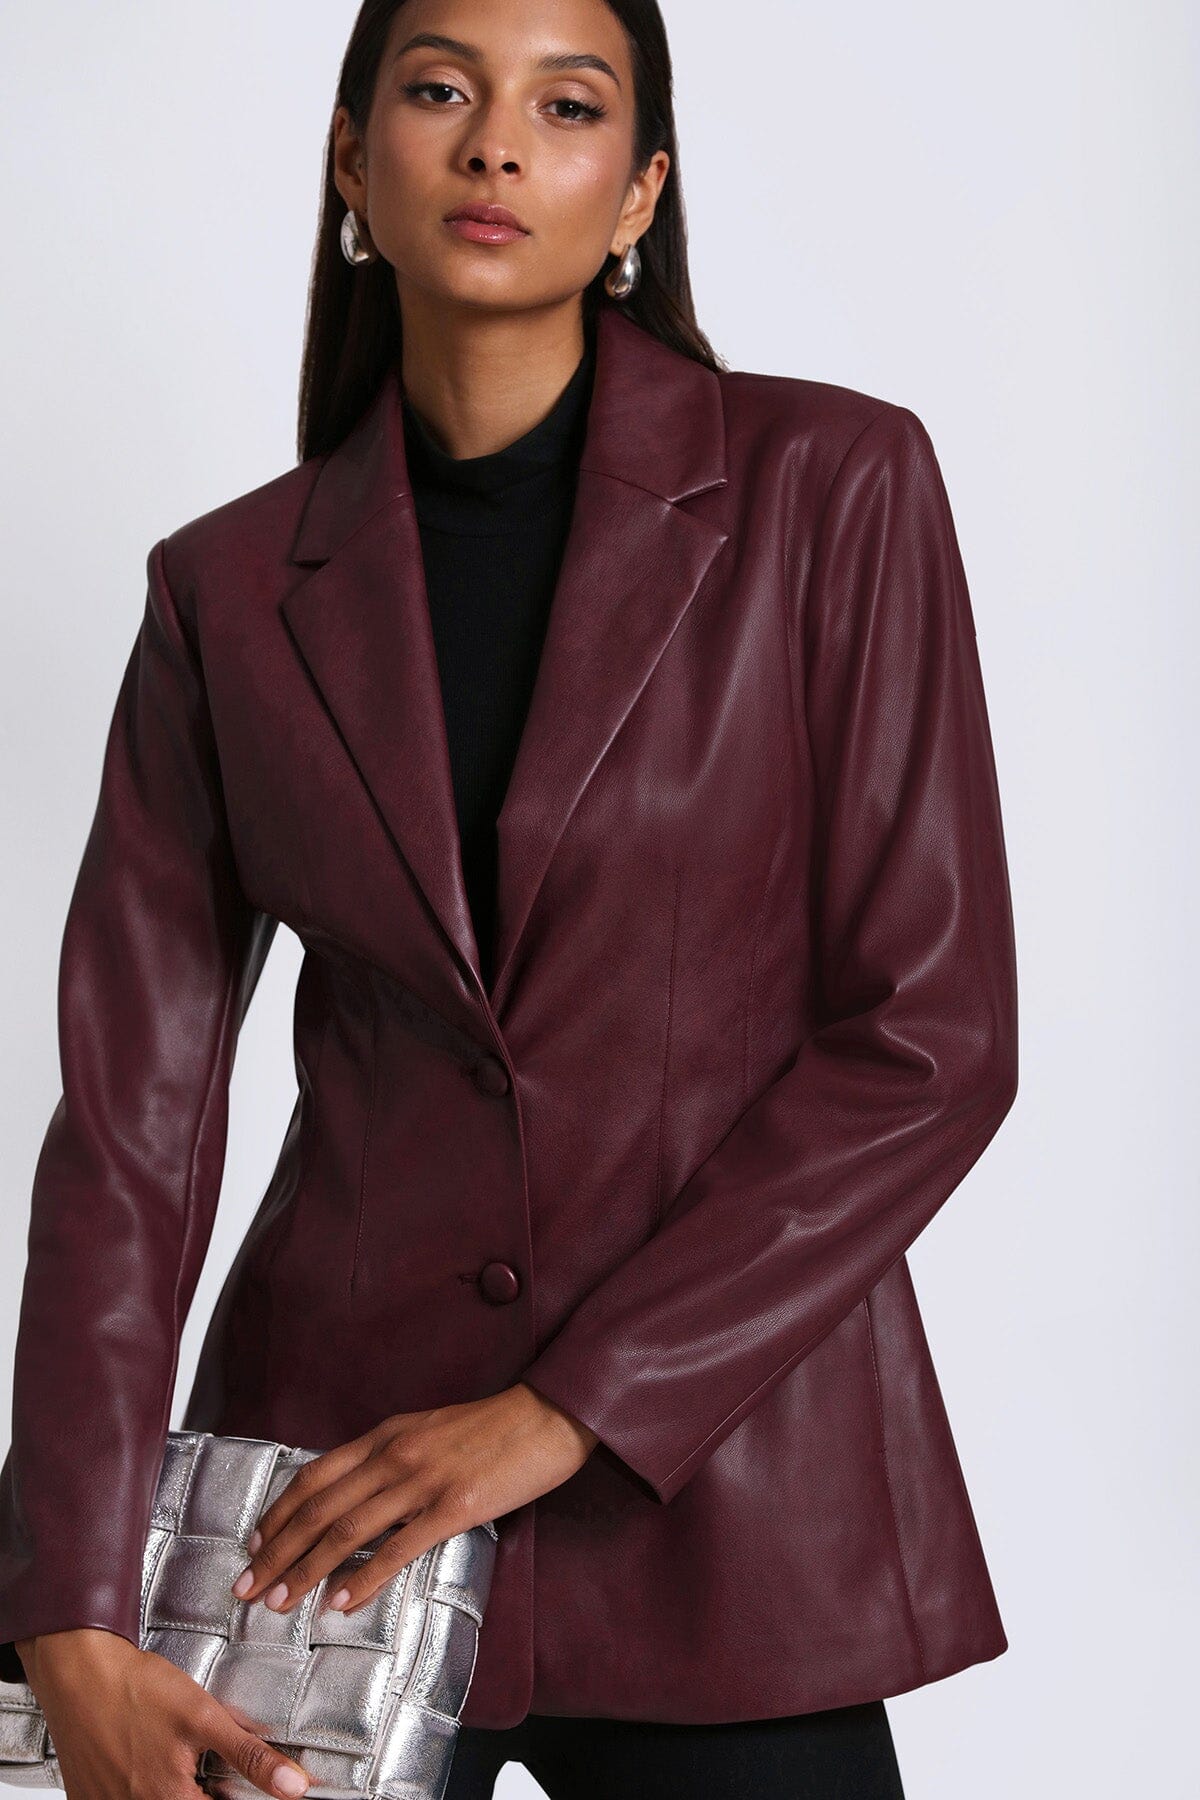 faux ever leather sculpted blazer jacket coat oxblood red - figure flattering day to night coats blazers jackets for women